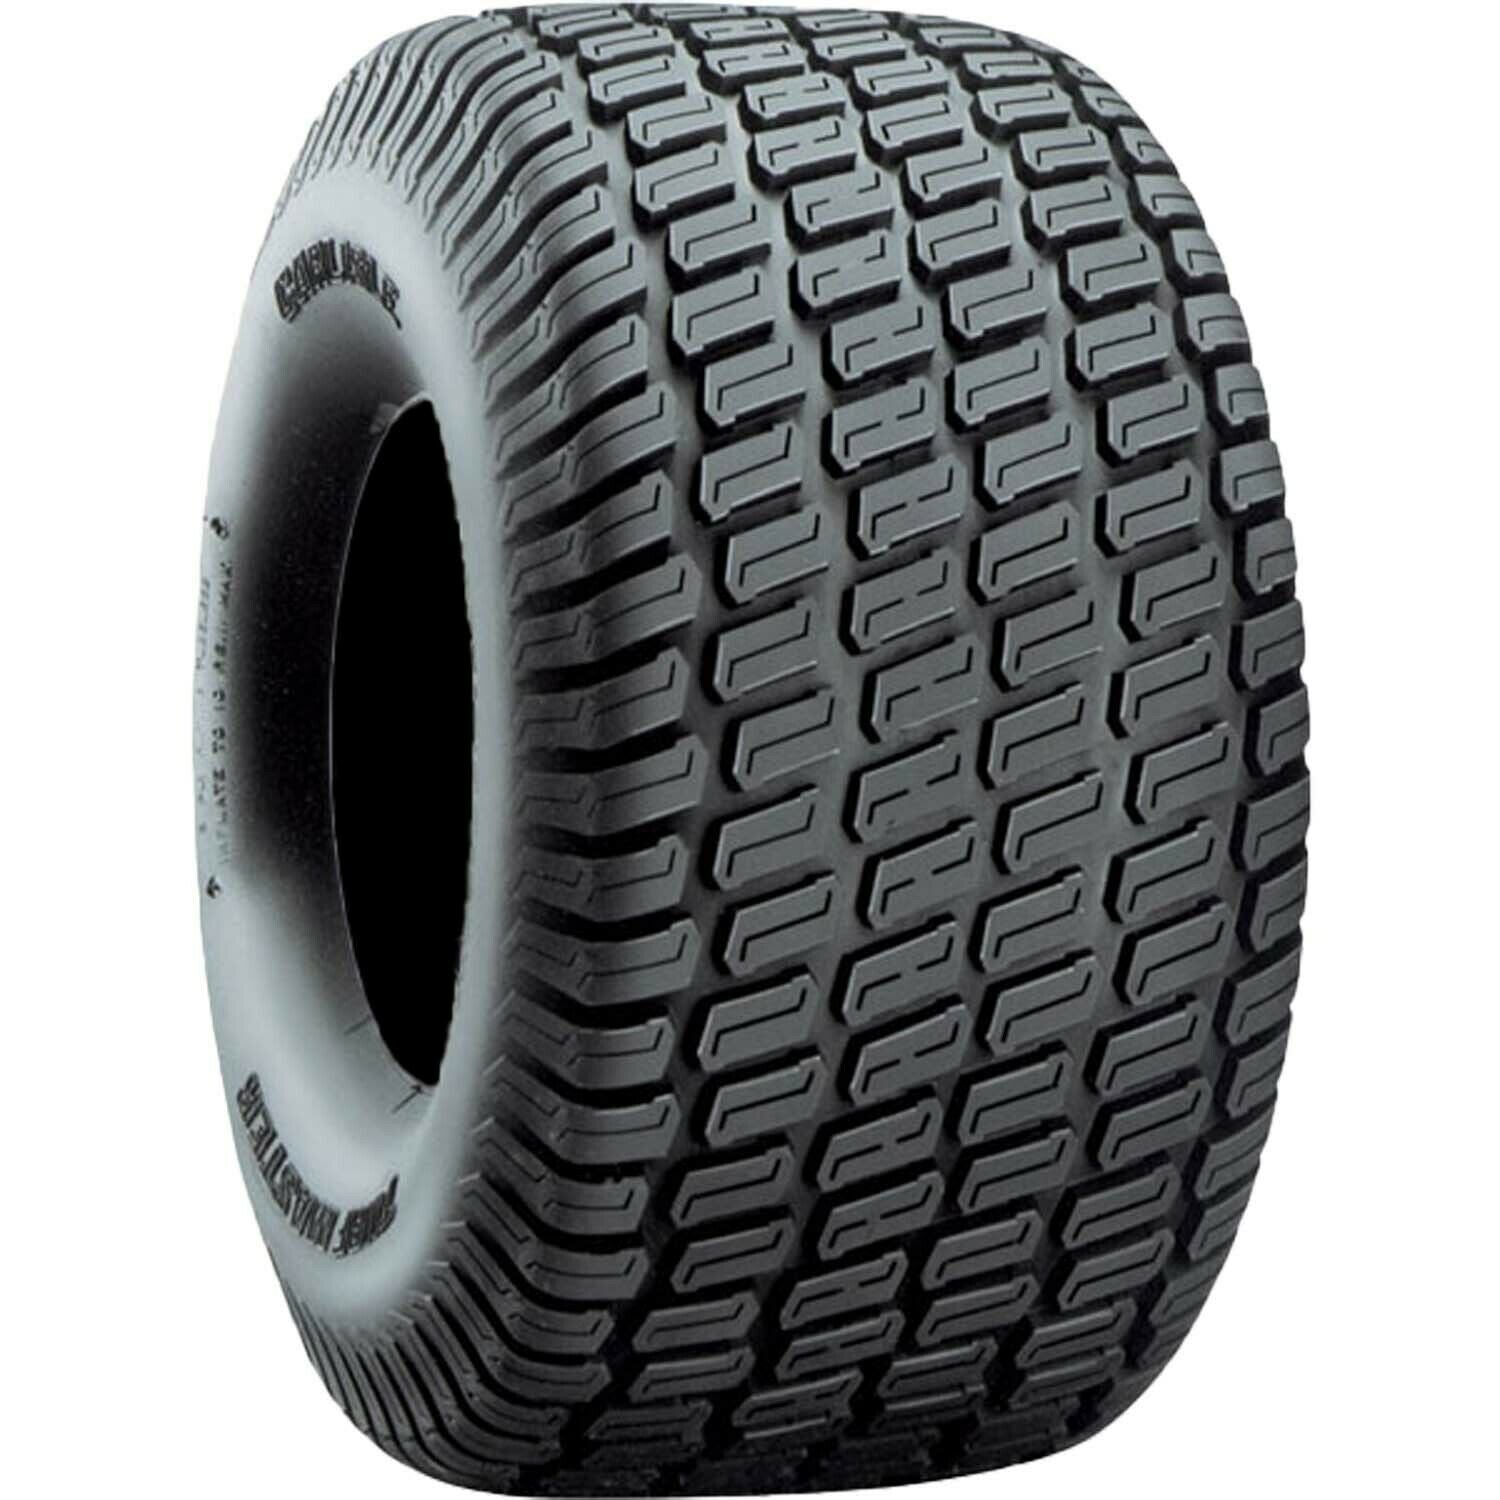 Carlisle Turf Master Lawn and Garden Tire 4Ply 20x10.00-8